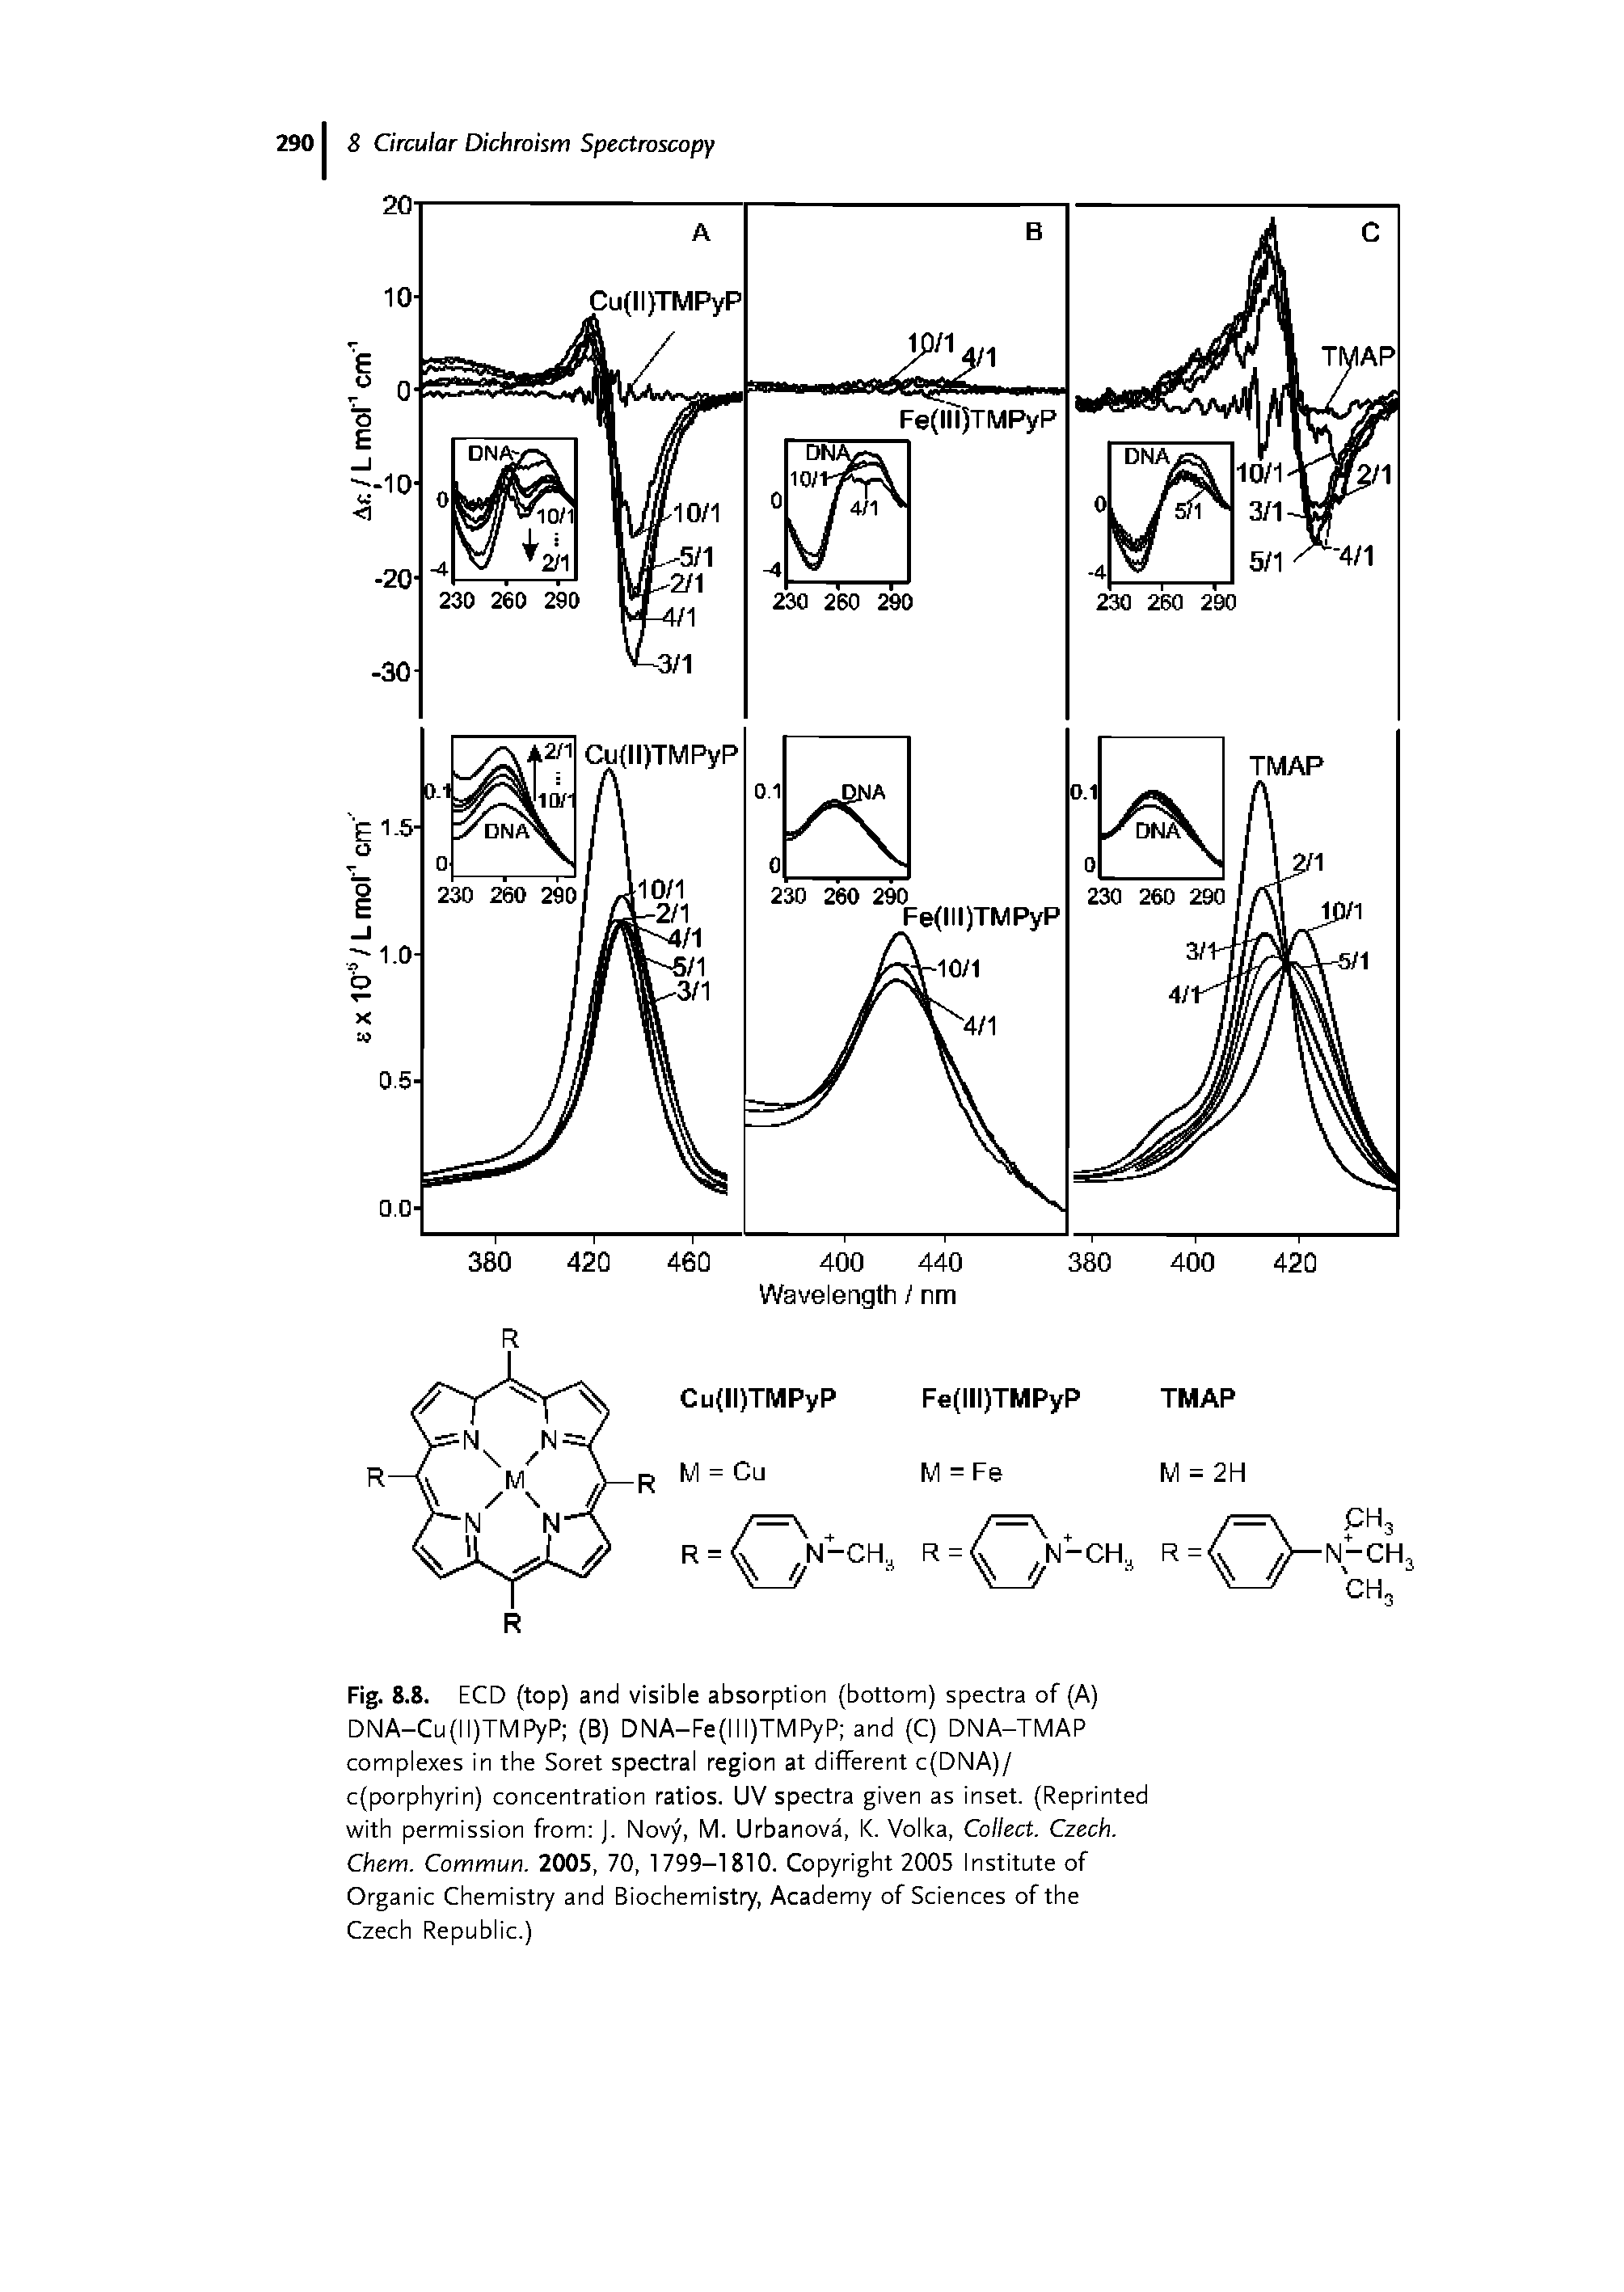 Fig. 8.8. ECD (top) and visible absorption (bottom) spectra of (A) DNA-Cu(ll)TMPyP (B) DNA-Fe(lll)TMPyP and (C) DNA-TMAP complexes in the Soret spectral region at different c(DNA)/ c(porphyrin) concentration ratios. UV spectra given as inset. (Reprinted with permission from J. Novy, M. Urbanova, K. Volka, Collect. Czech. Chem. Commun. 2005, 70, 1799-1810. Copyright 2005 Institute of Organic Chemistry and Biochemistry, Academy of Sciences of the Czech Republic.)...